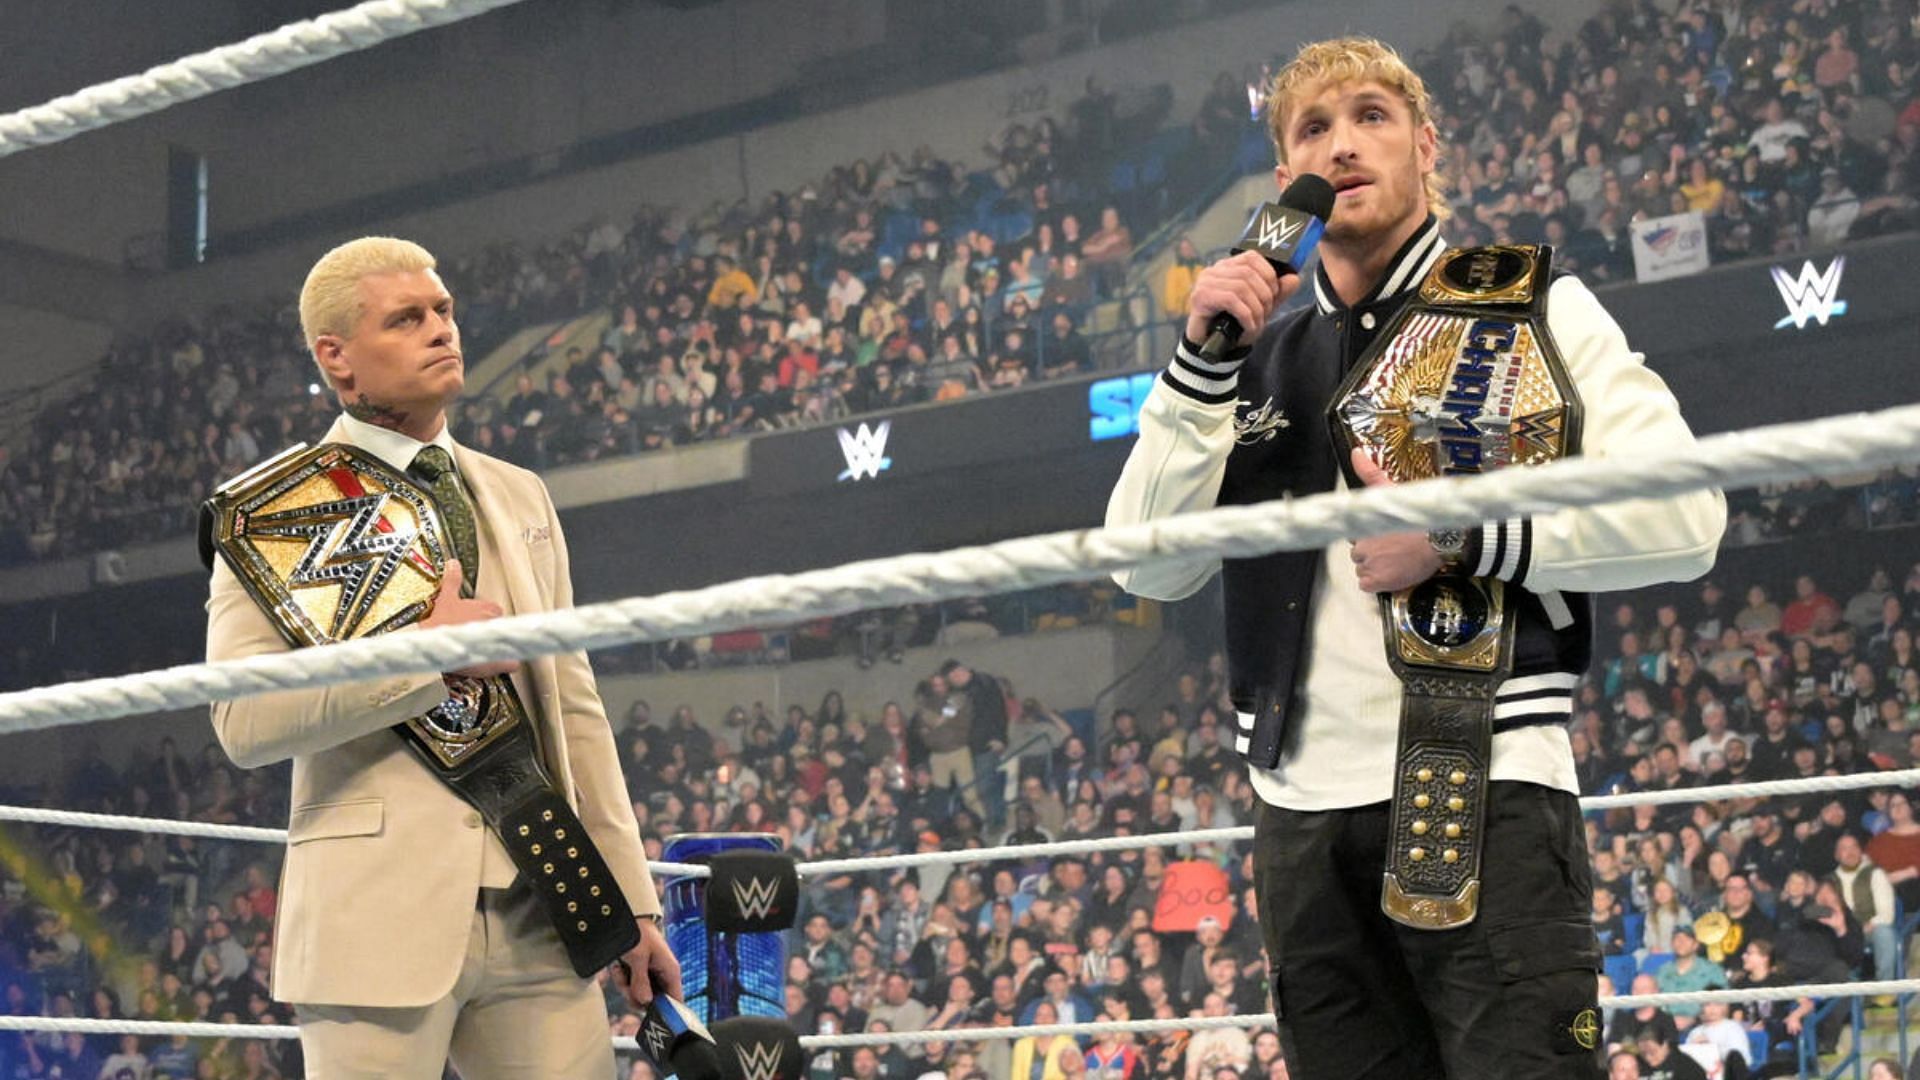 Cody Rhodes and Logan Paul will face each other